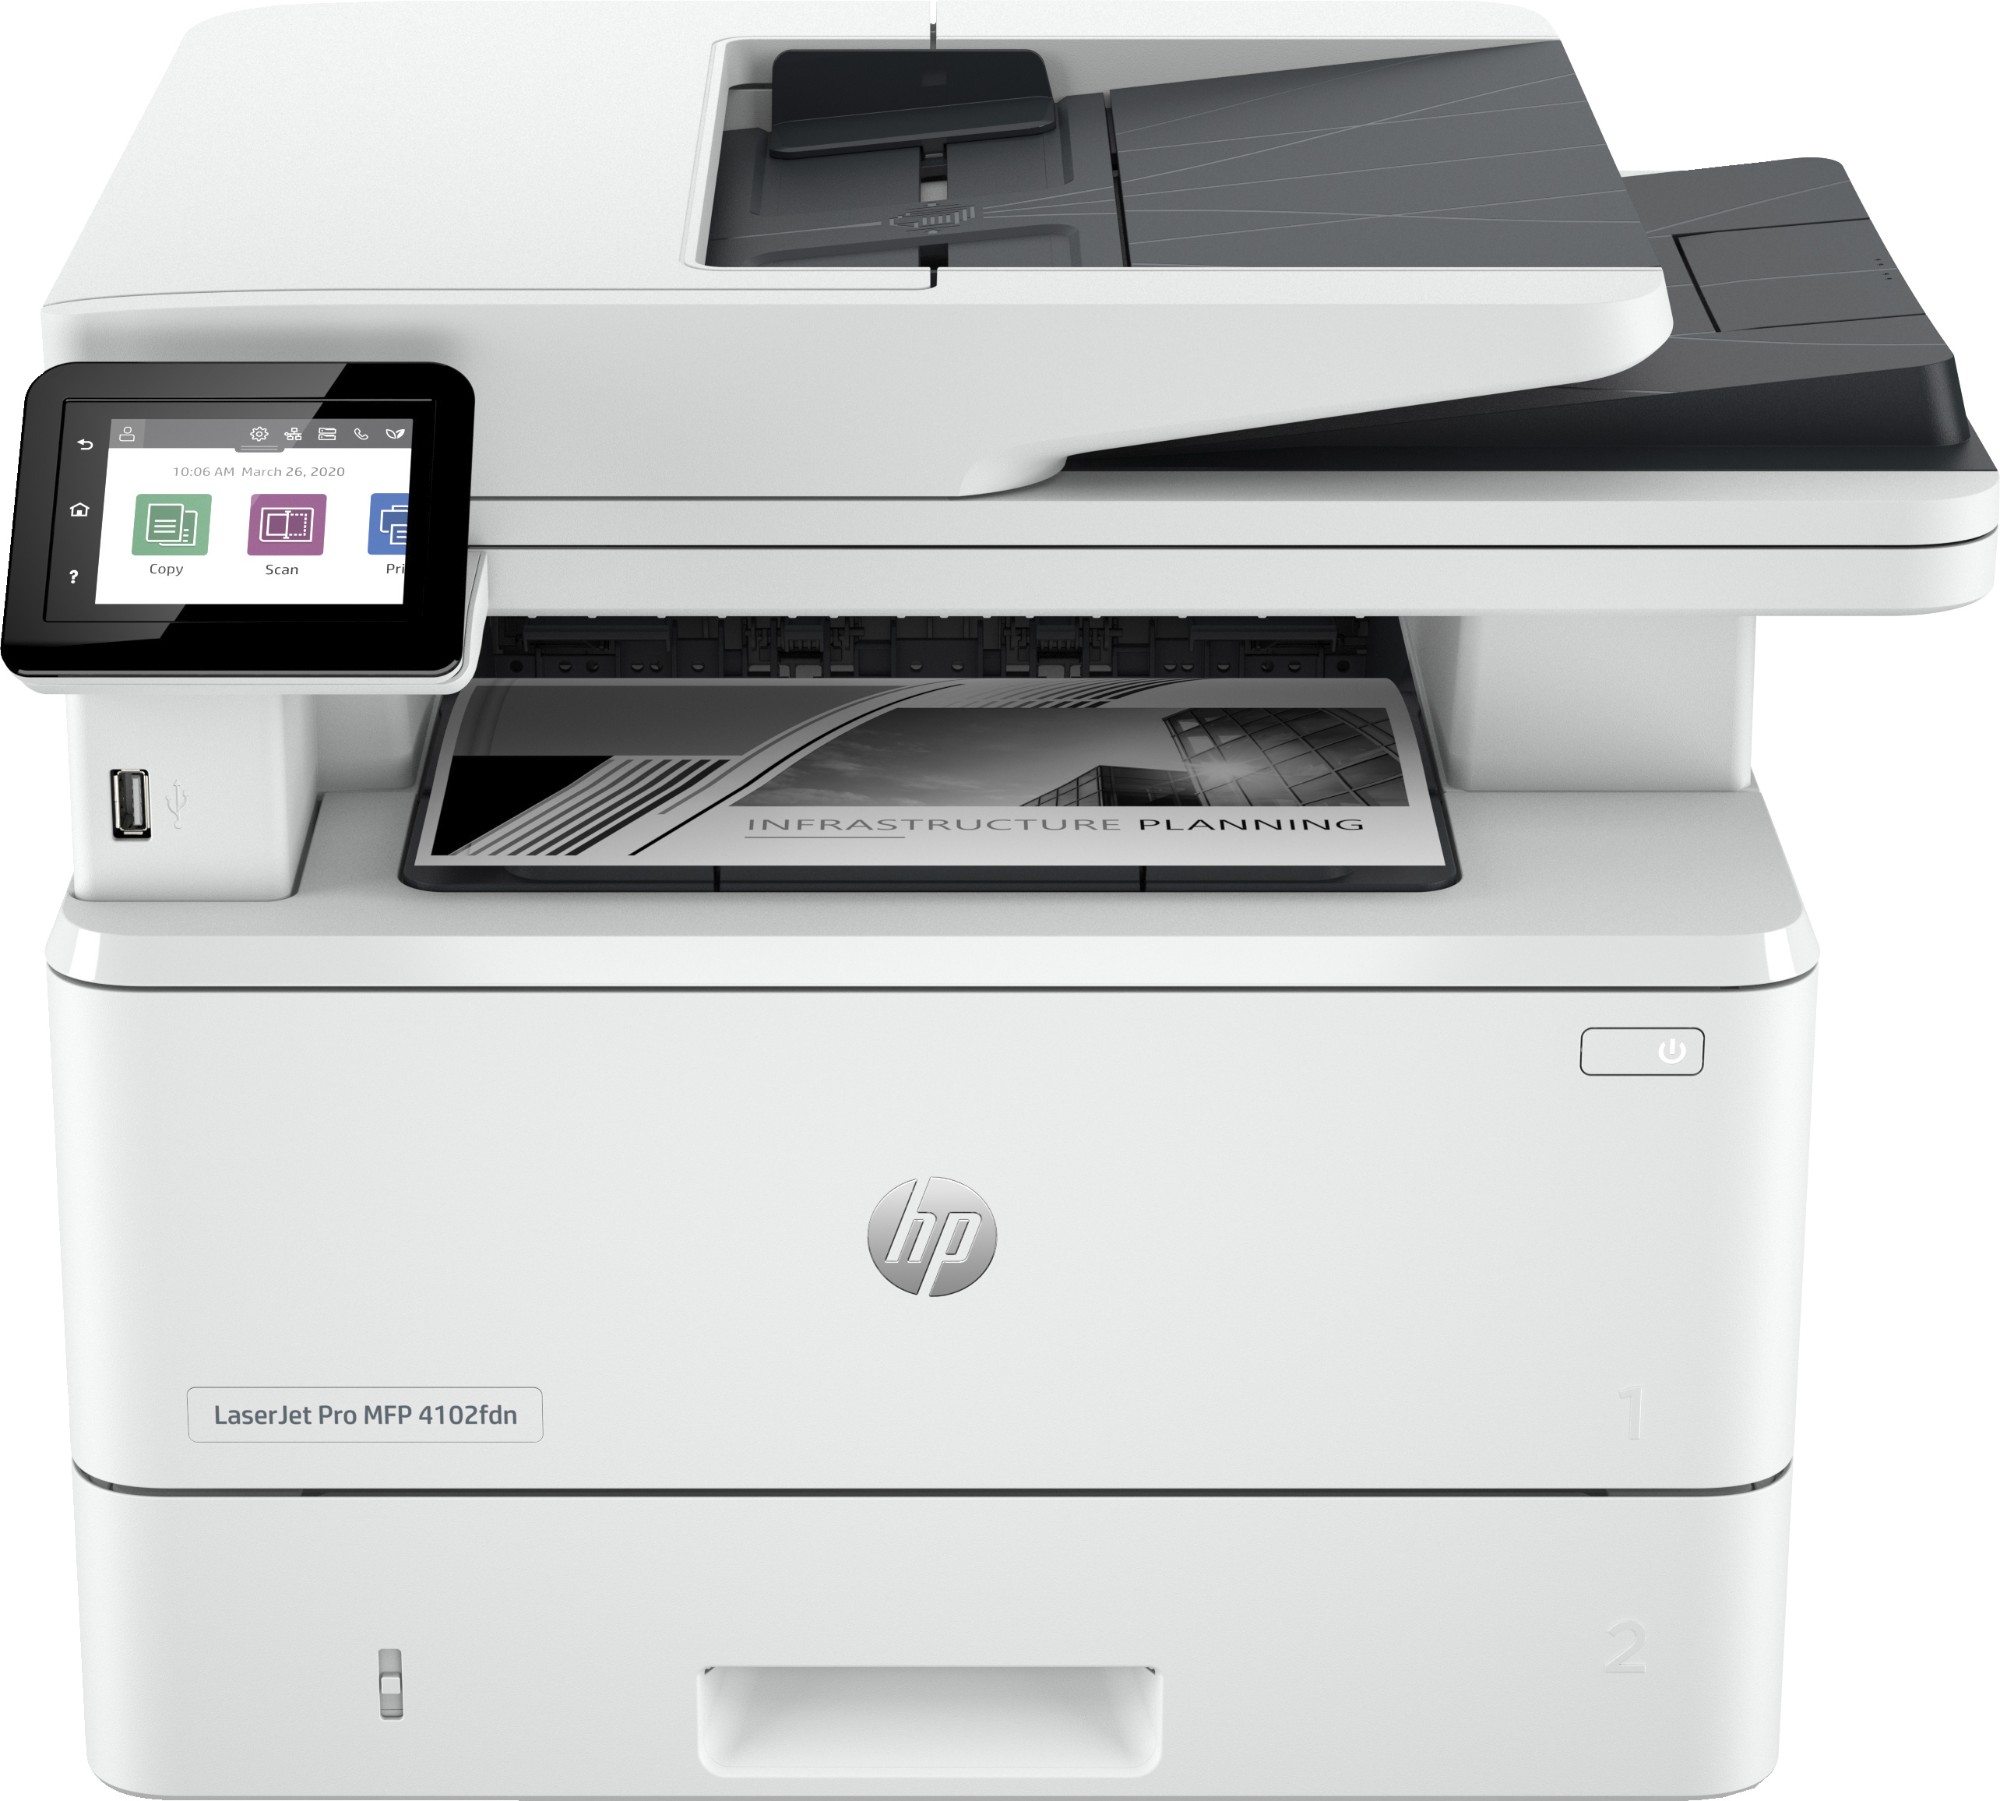 HP LaserJet Pro MFP 4102fdn Printer, Black and white, Printer for Small medium business, Print, copy, scan, fax, Instant Ink eligible; Print from phone or tablet; Automatic document feeder; Two-sided printing